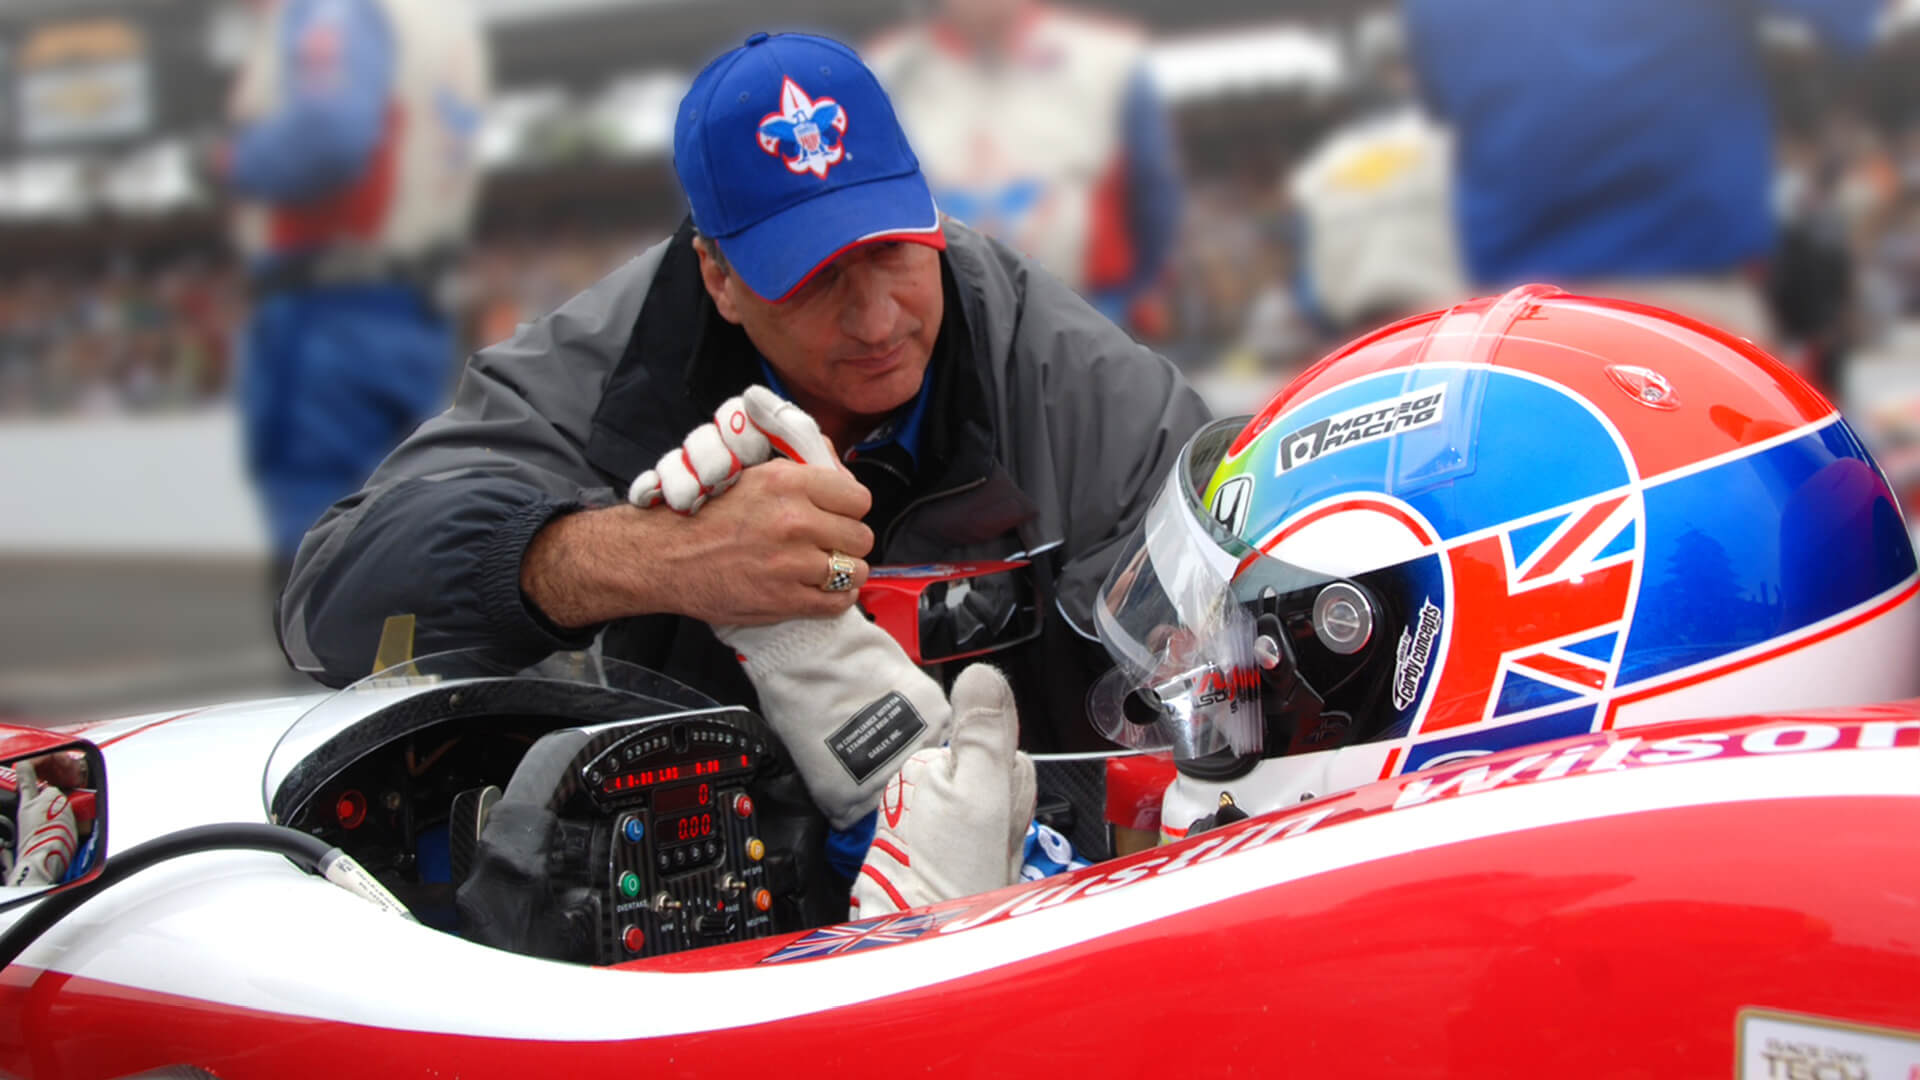 Pappas offers Justin Wilson some encouragement before the start of the 2013 Indy 500.